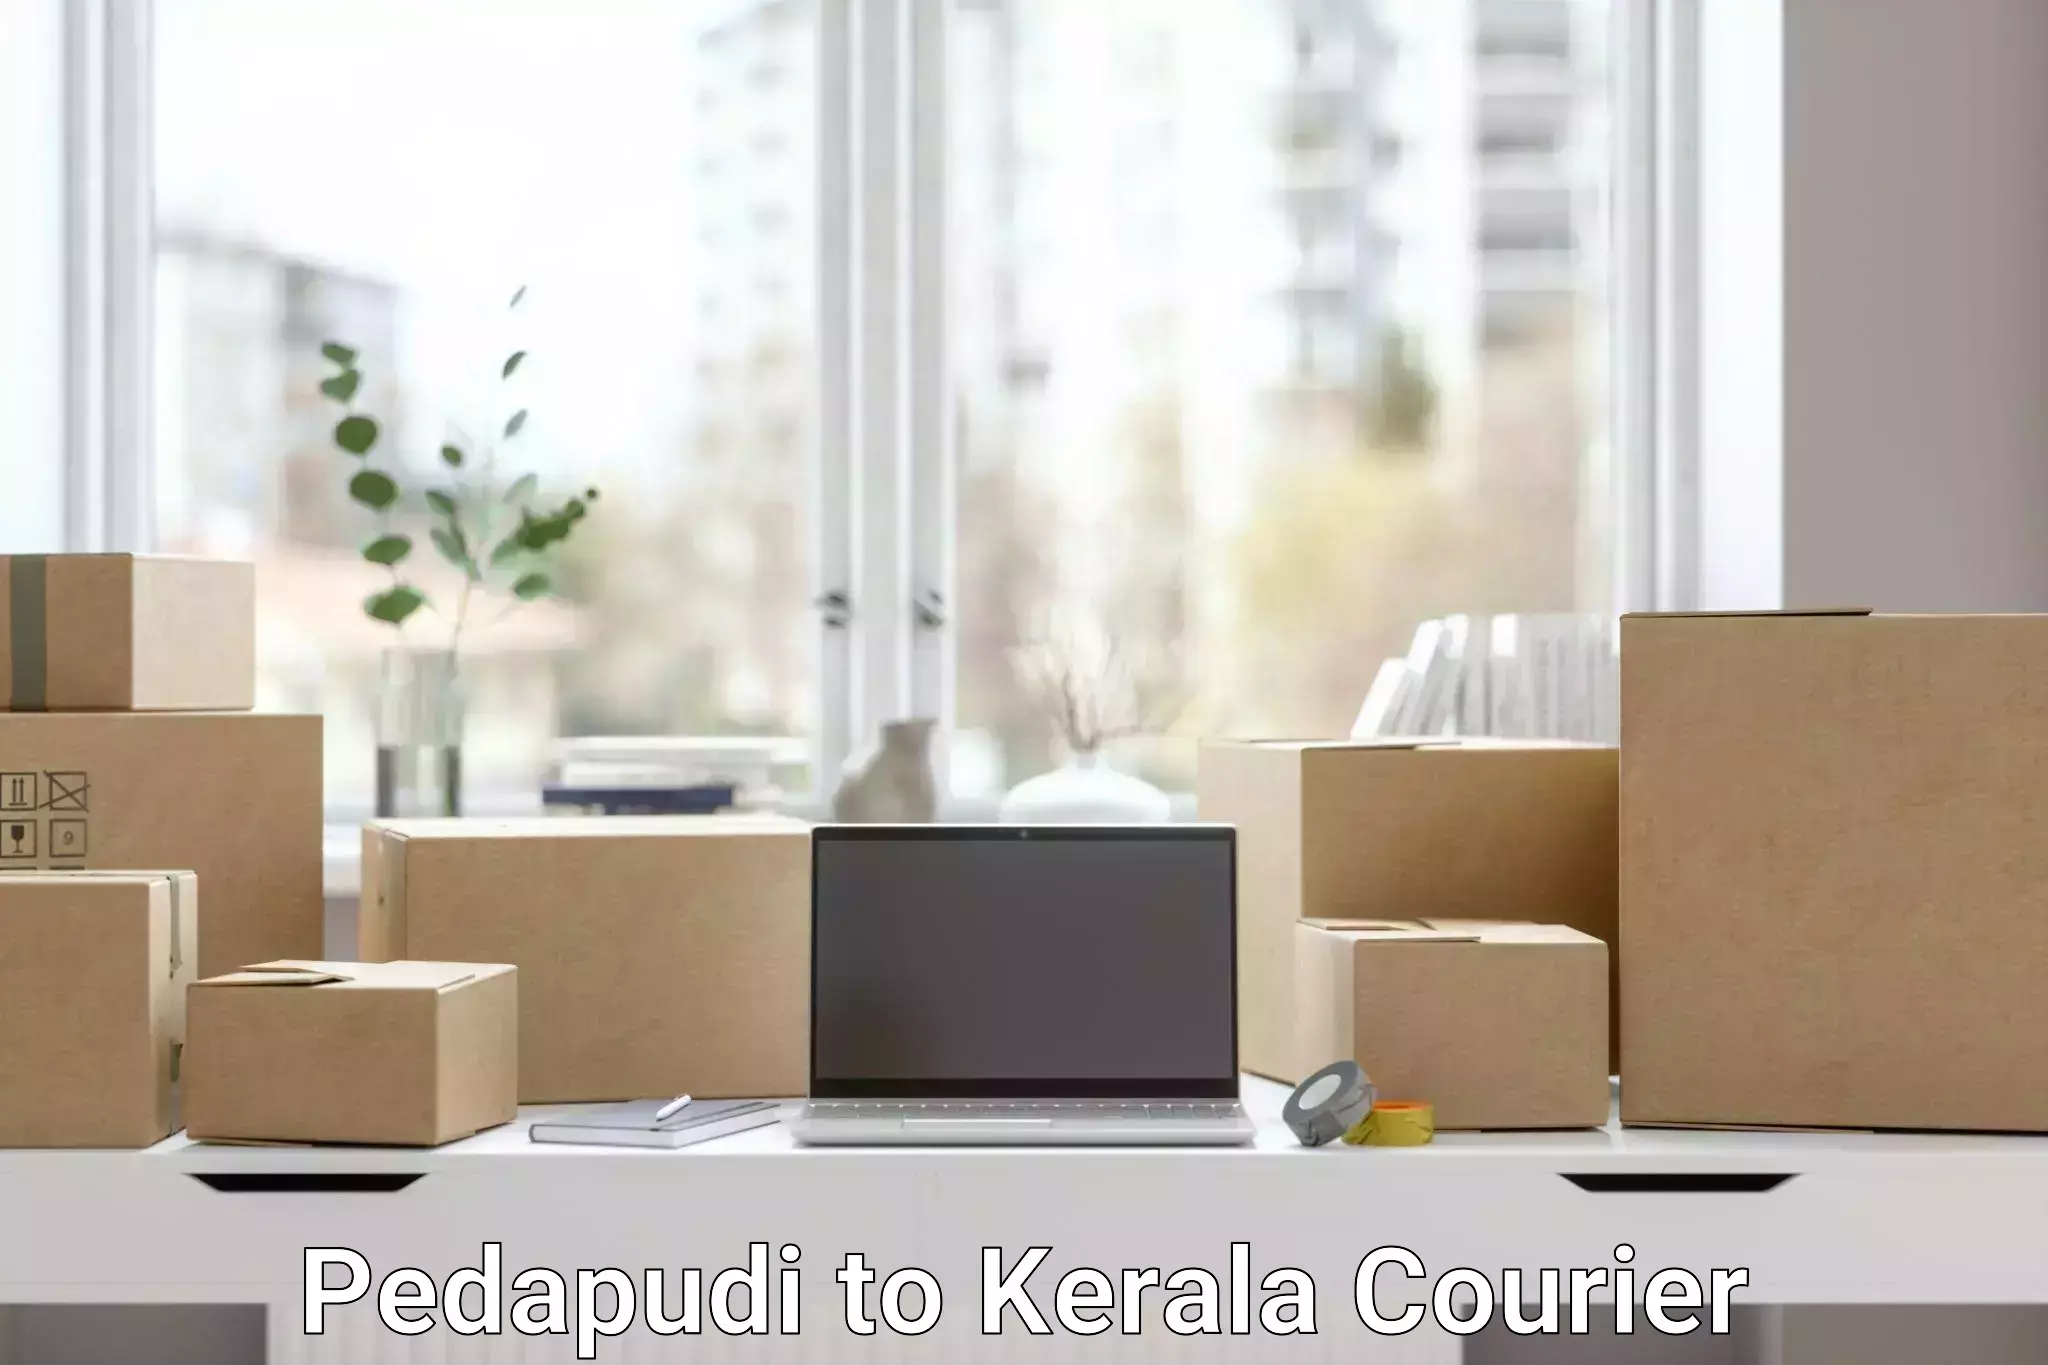 Sustainable shipping practices in Pedapudi to Koyilandy